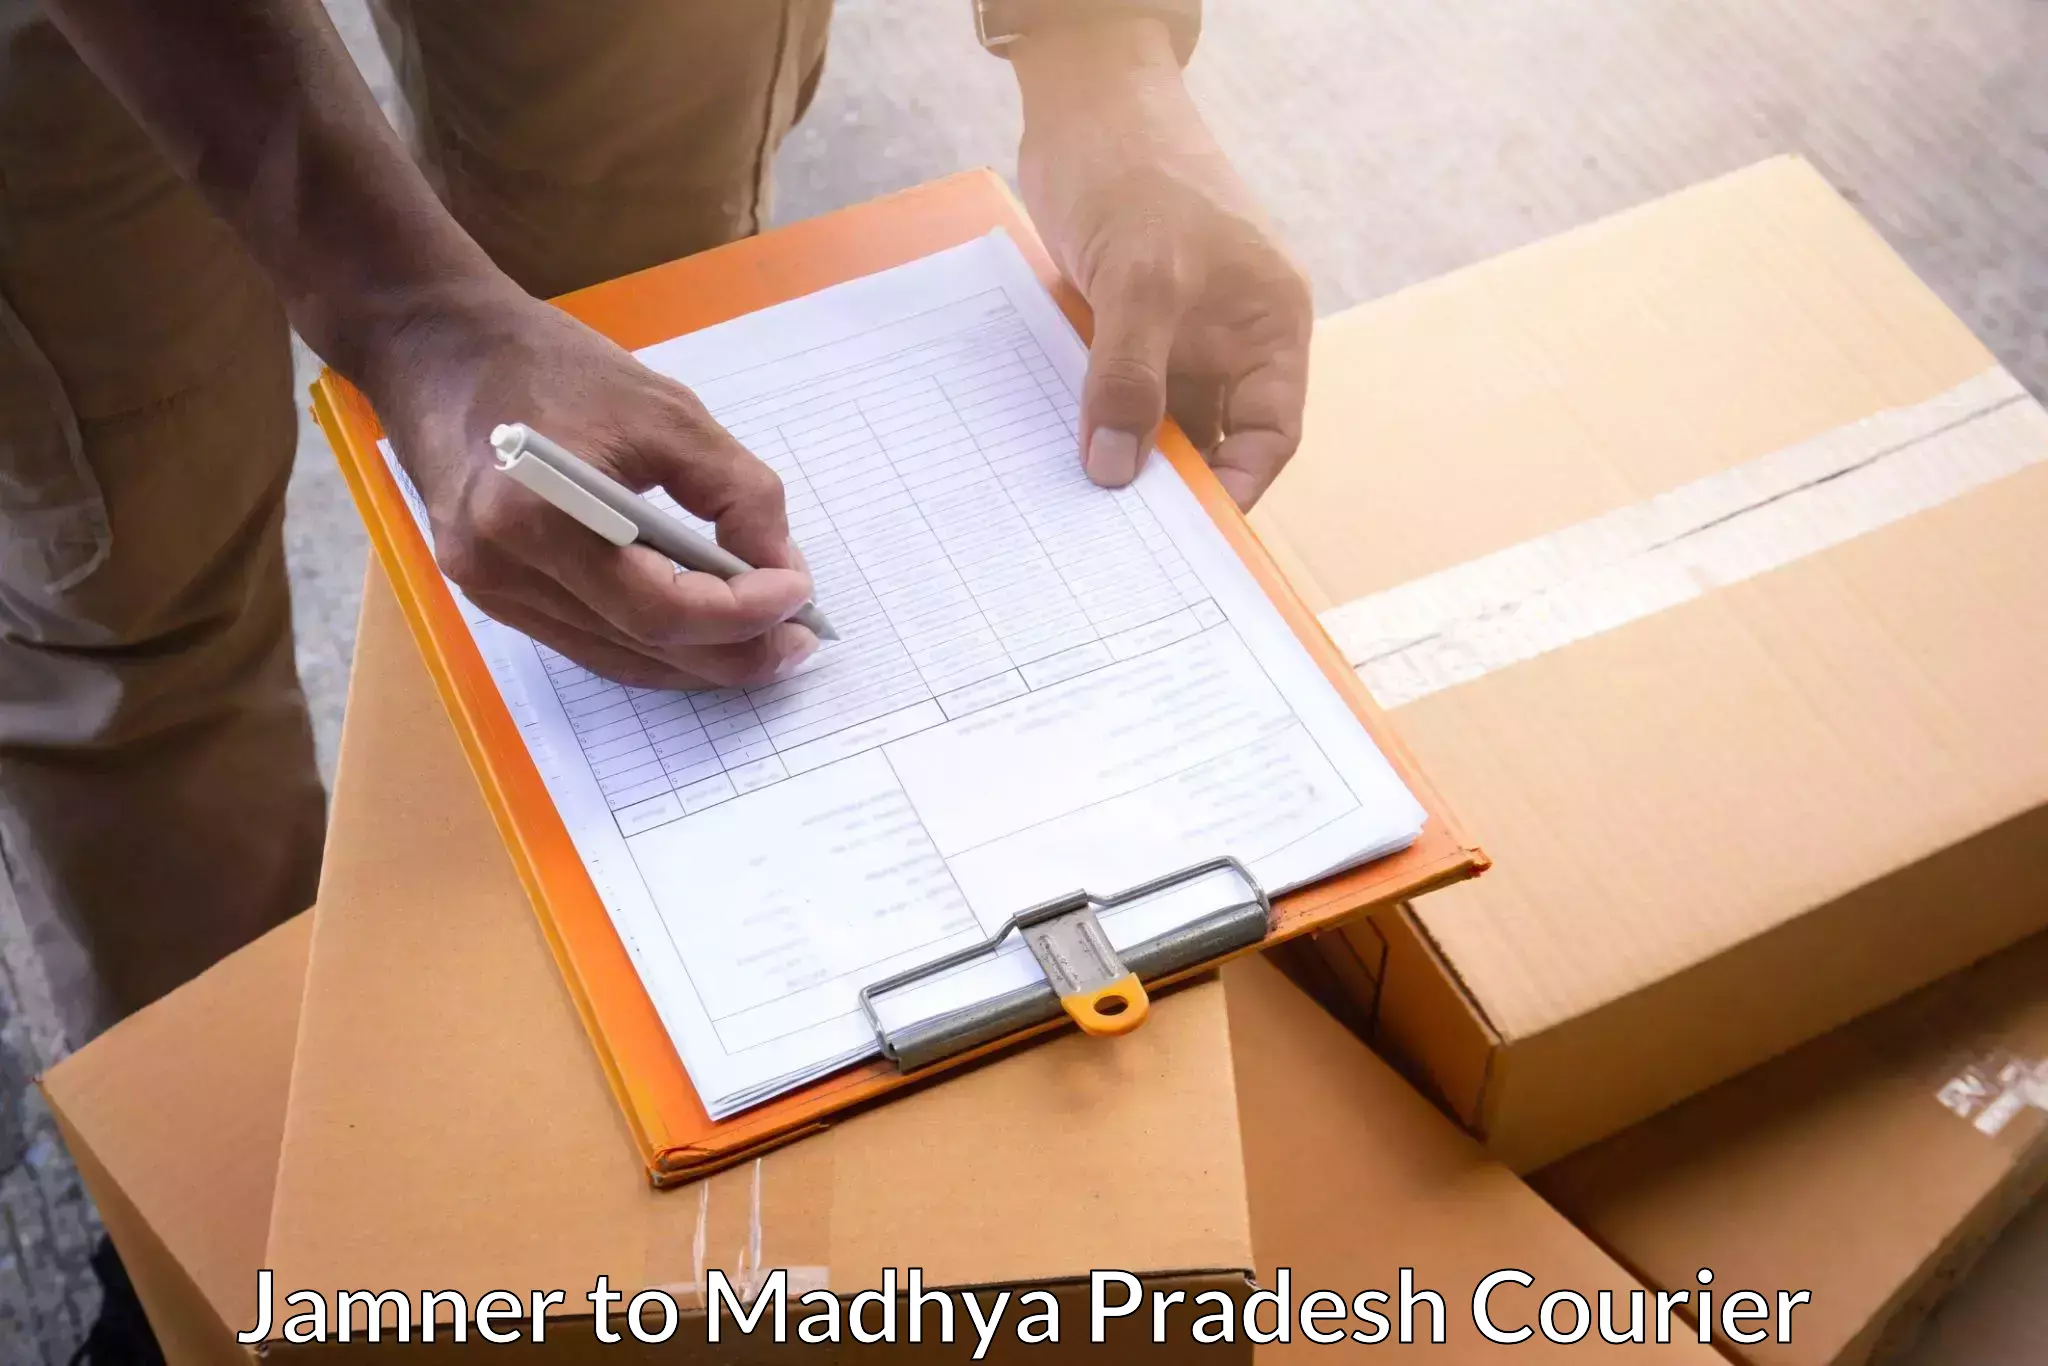 24-hour courier services in Jamner to Guna